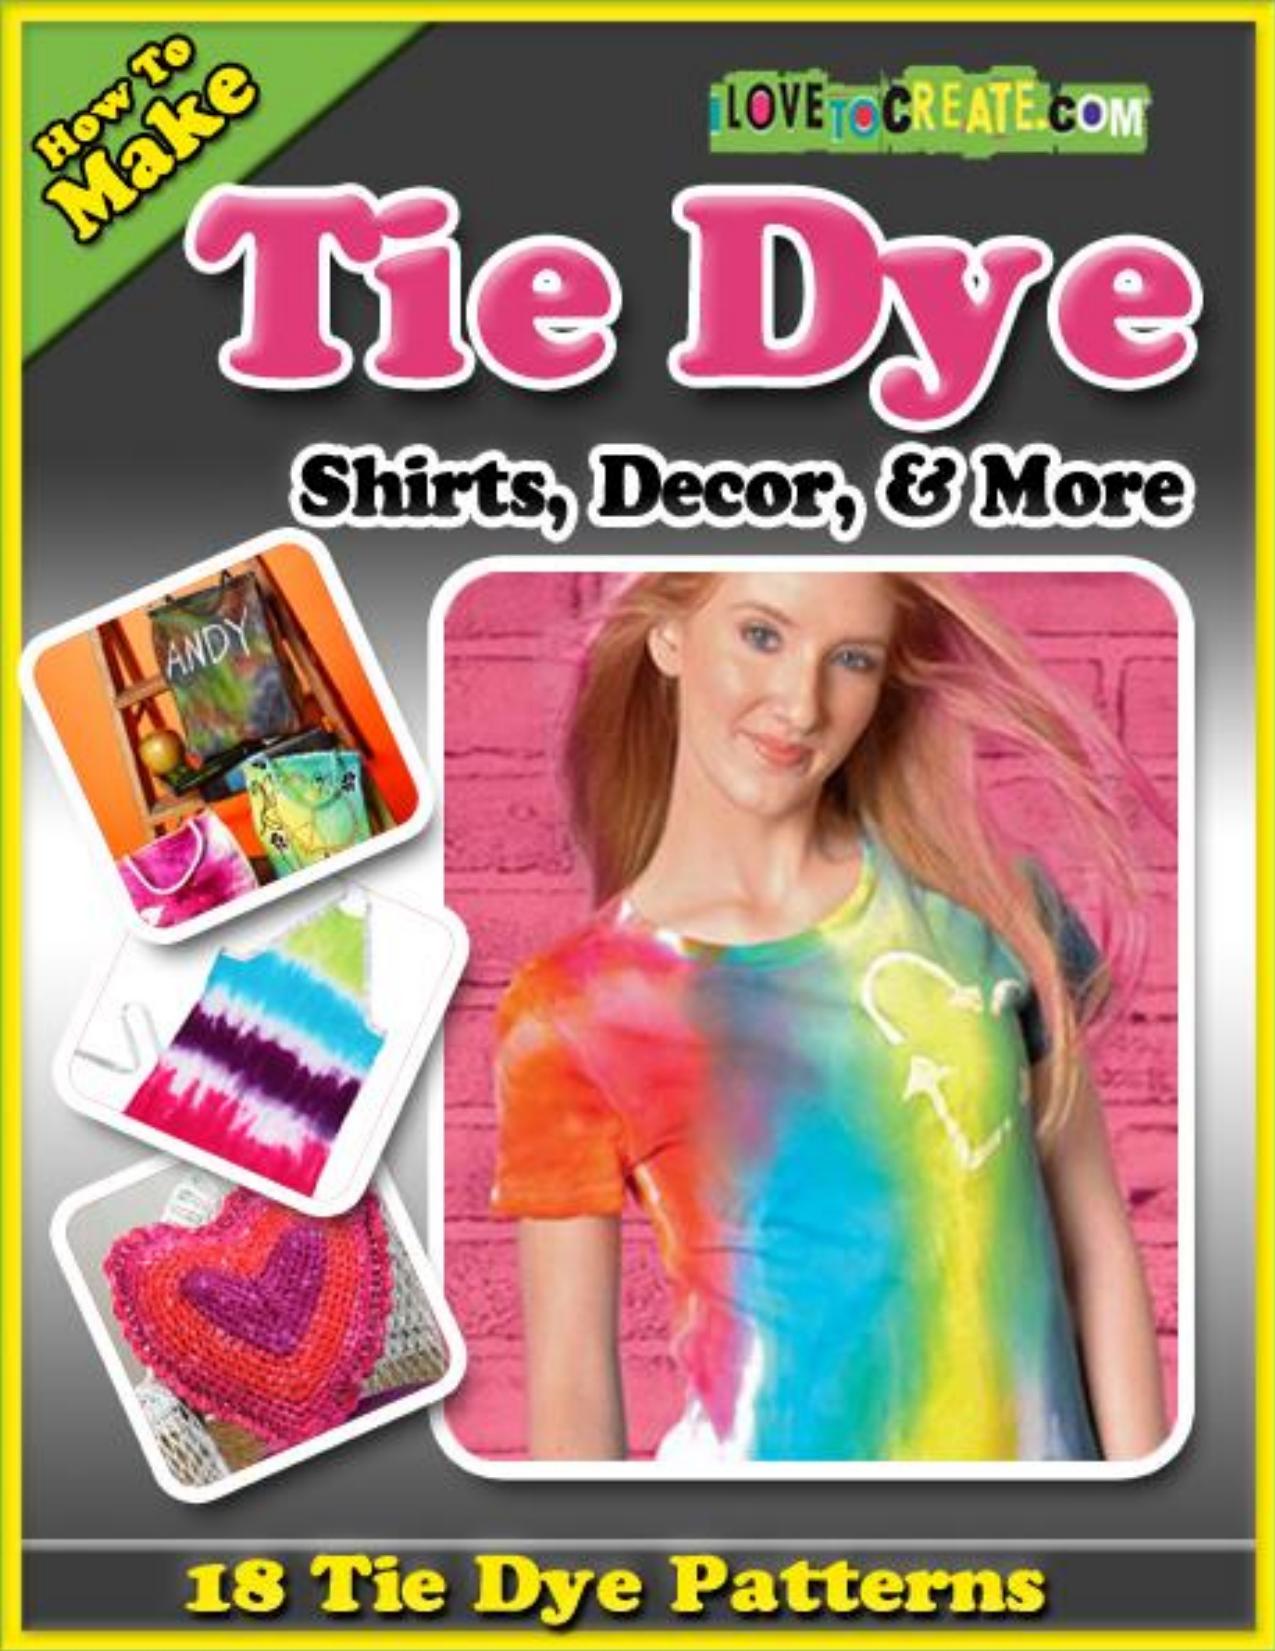 How To Make Tie Dye Shirts Decor and More 2012